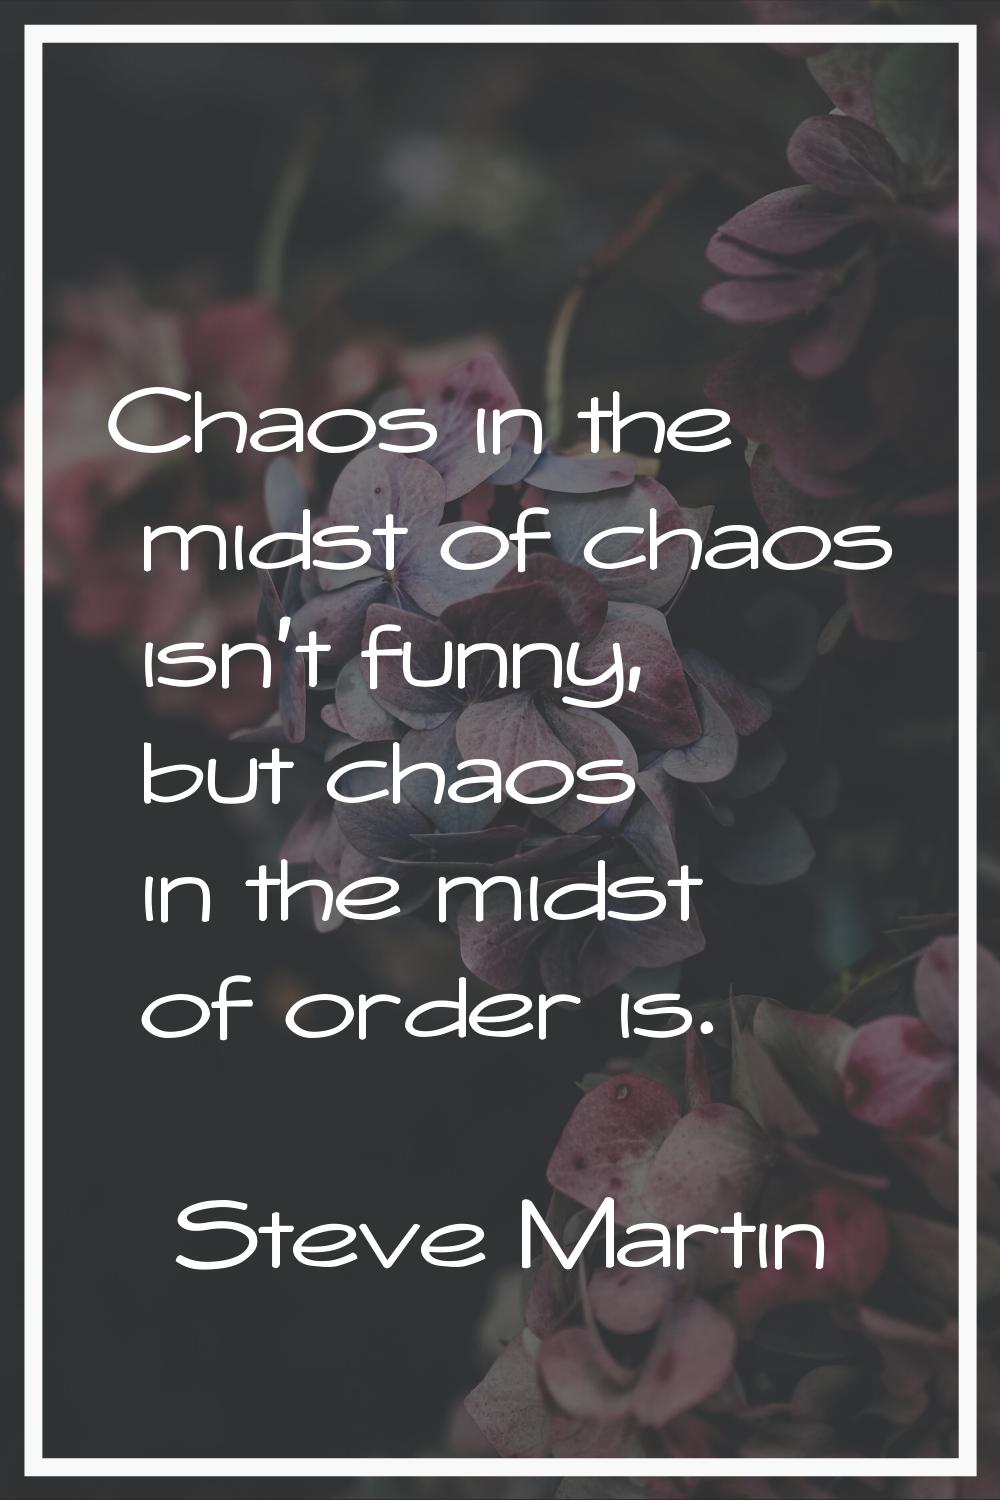 Chaos in the midst of chaos isn't funny, but chaos in the midst of order is.